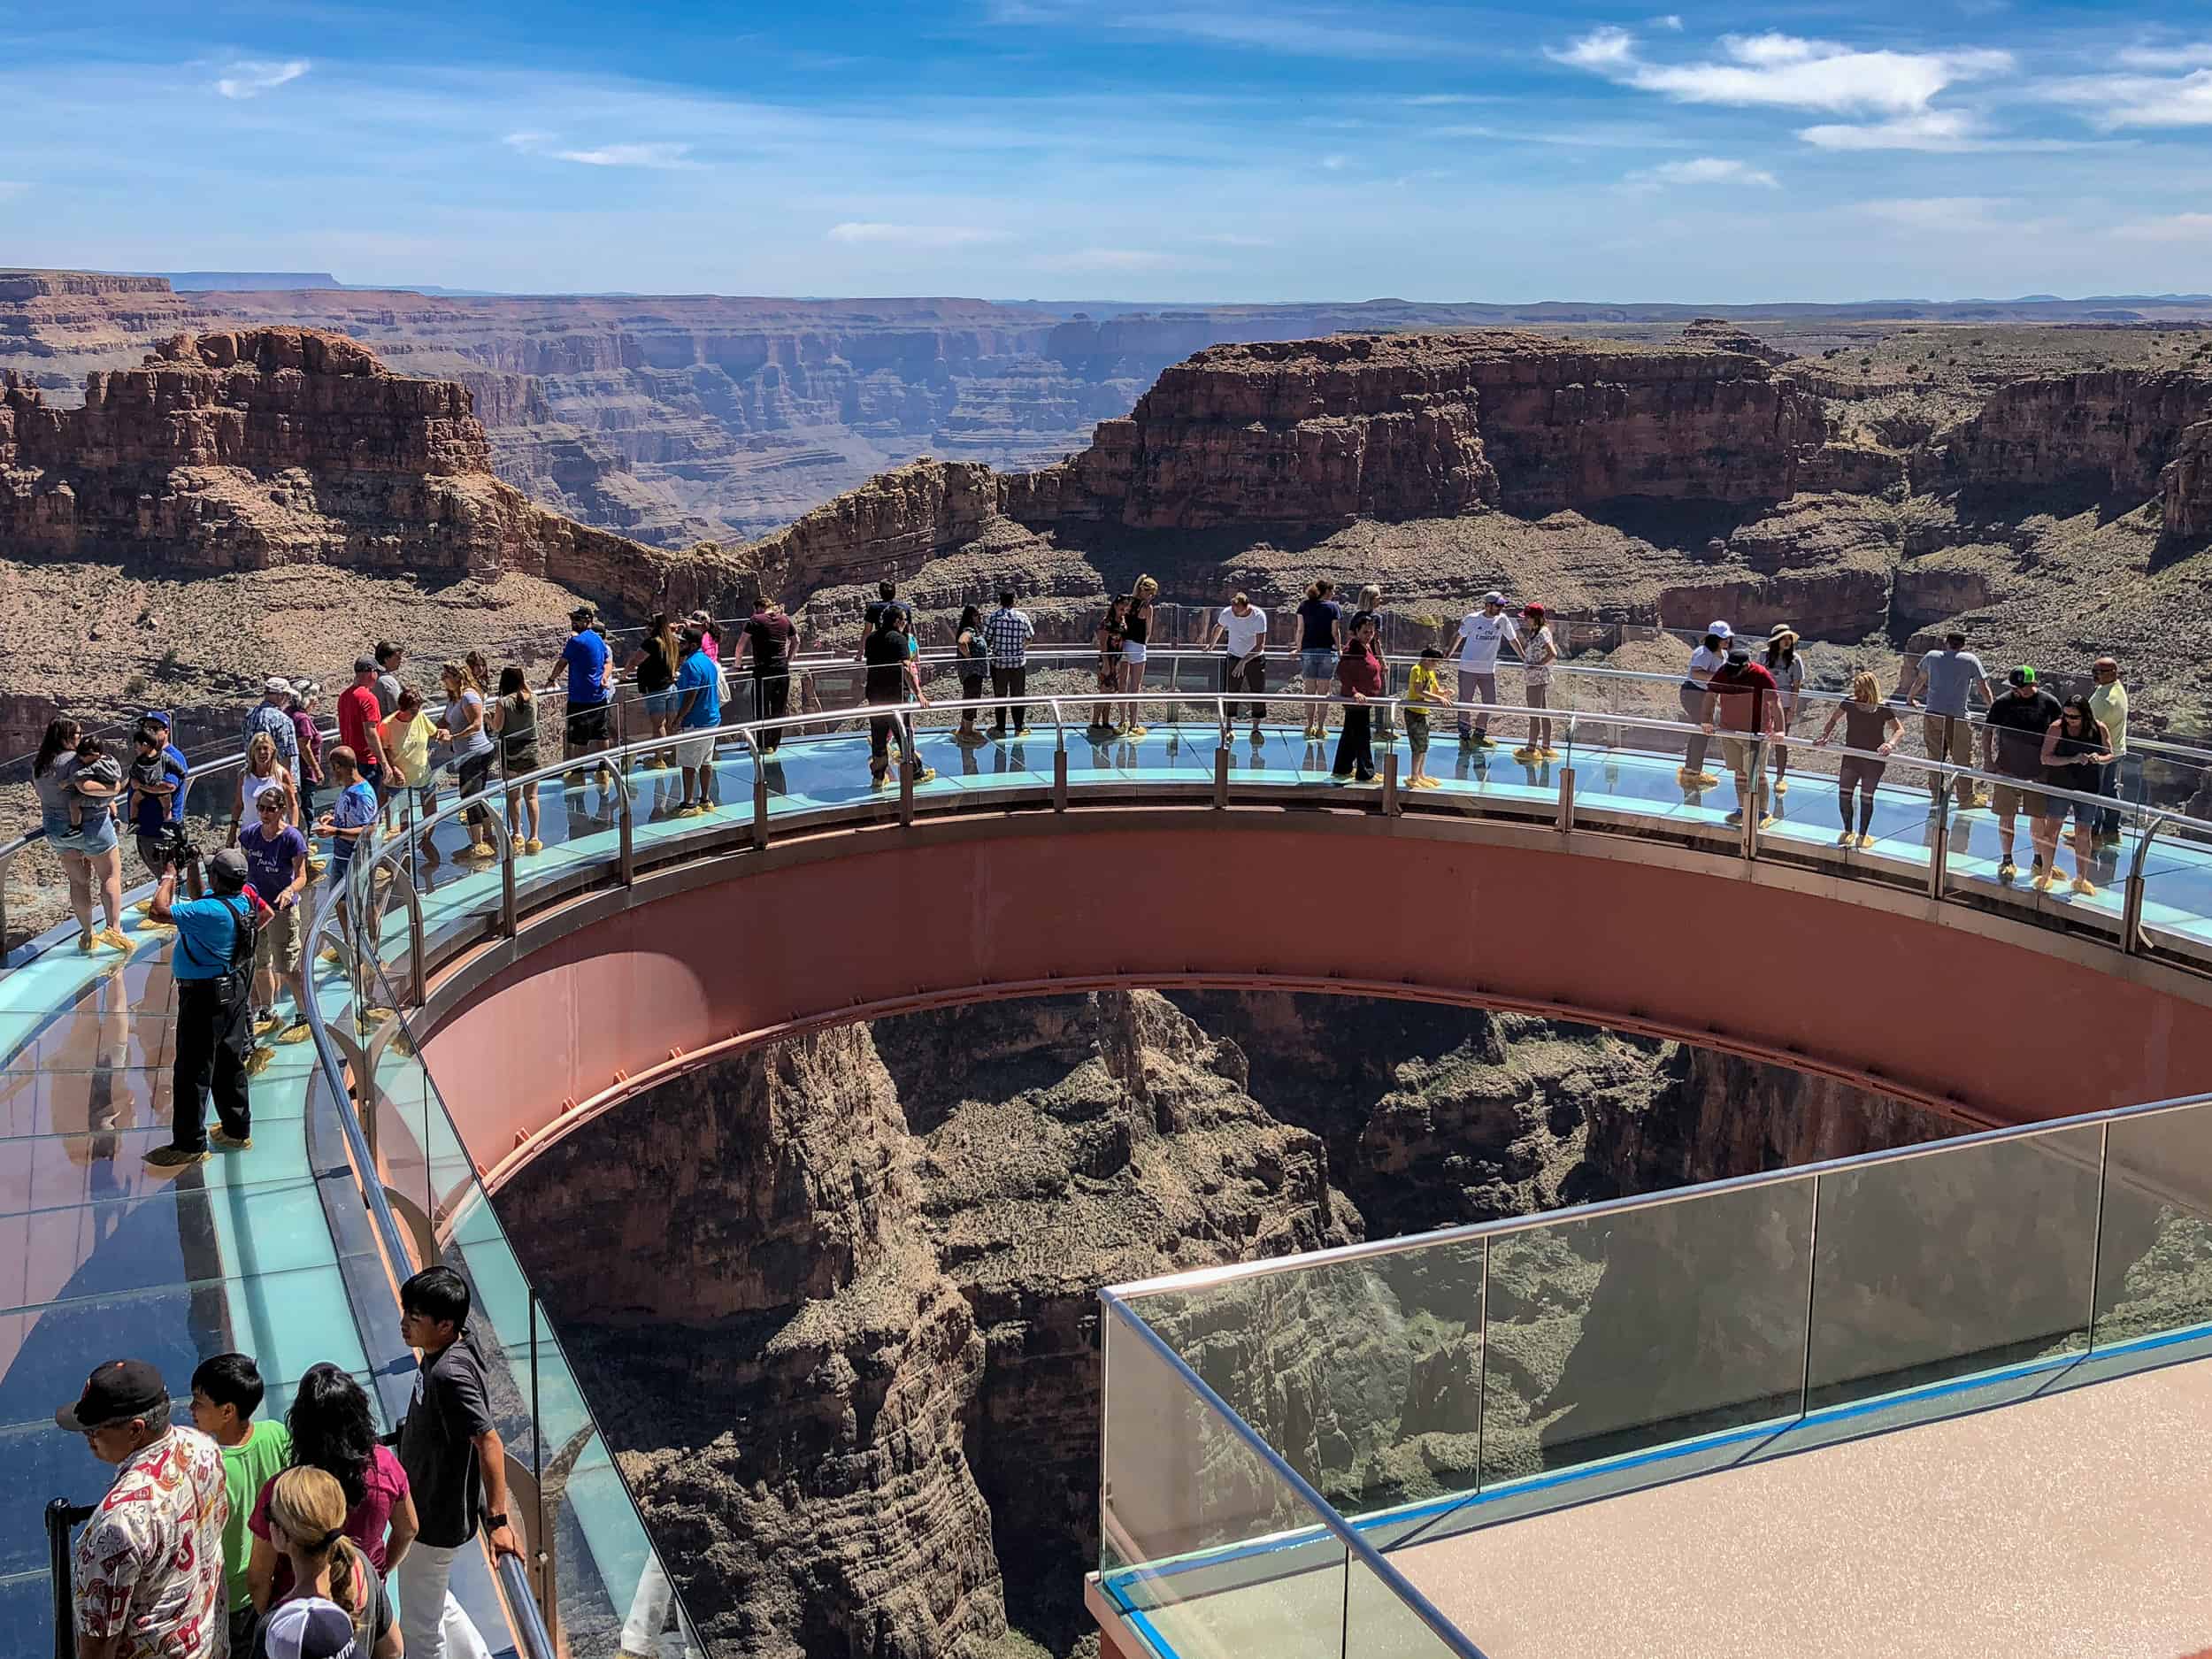 What kind of attractions is the Grand Canyon?